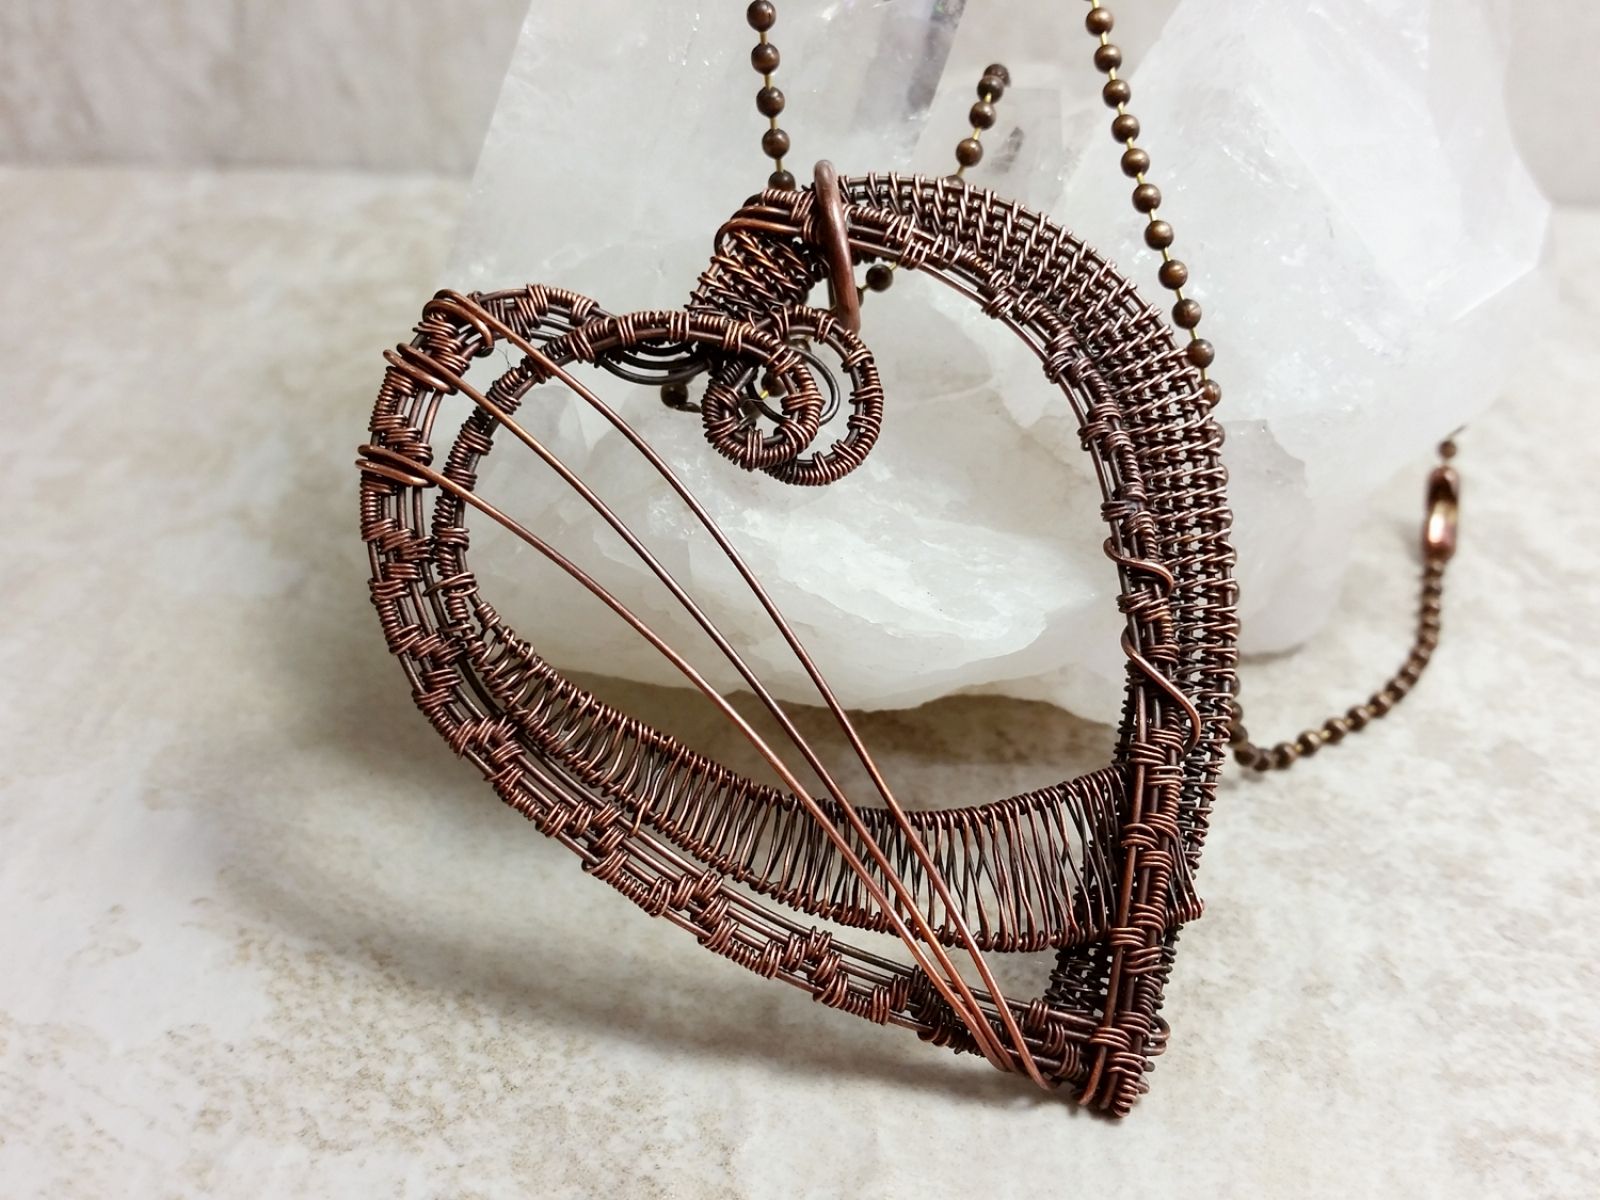 Asymmetrical Heart Copper Wire Wrapped Necklace Pendant Wearable Art Intended For Most Current Asymmetrical Heart Necklaces (View 16 of 25)